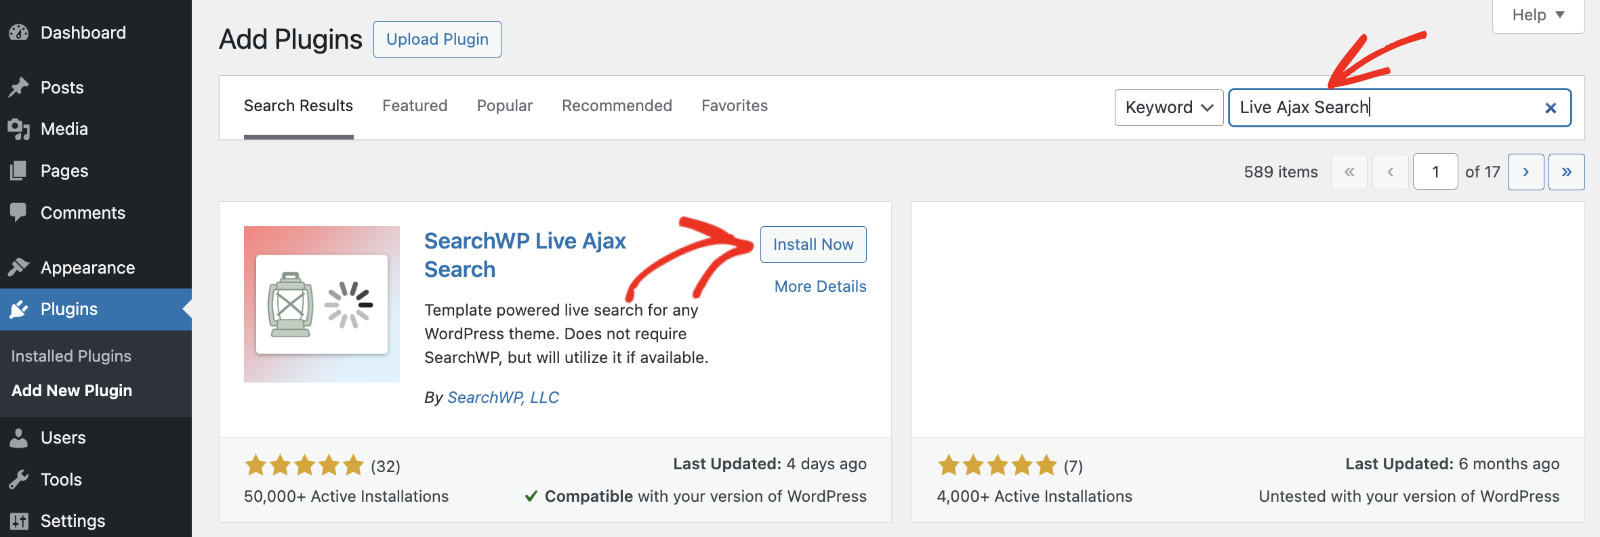 How To Add Live Search To WordPress For Free: Install Live Ajax Search Step 2